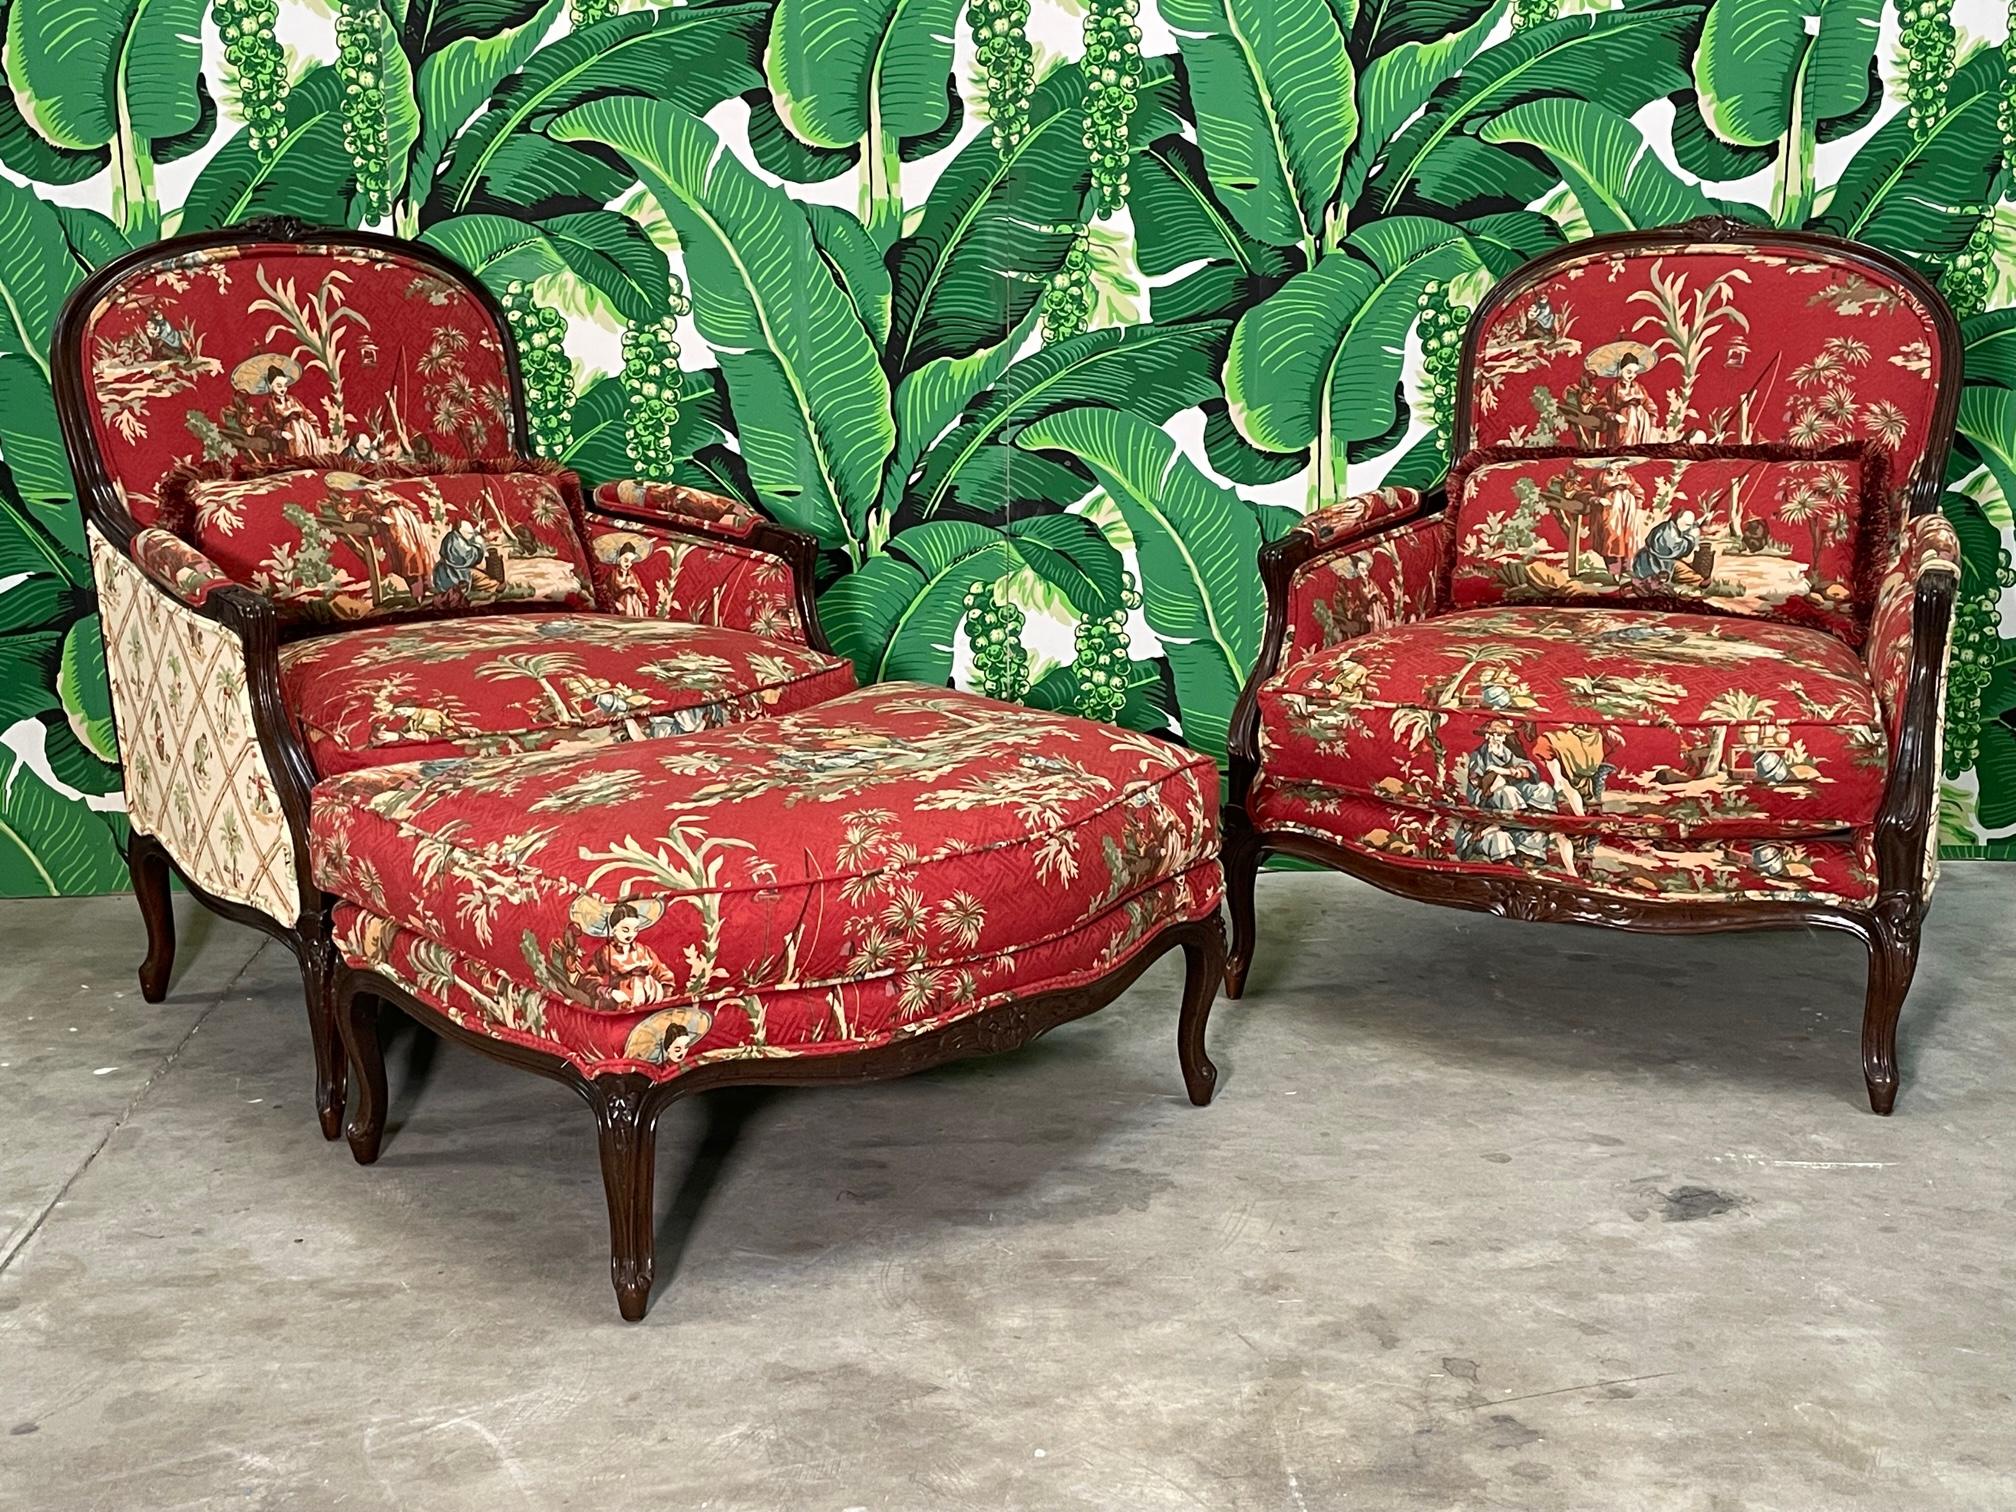 Pair of Bergere chairs with matching ottoman feature a chinoiserie fabric, cabriole legs, and hand carved detailing on the frame. Very good condition with only minor imperfections consistent with age. As with all vintage pieces, may exhibit scuffs,